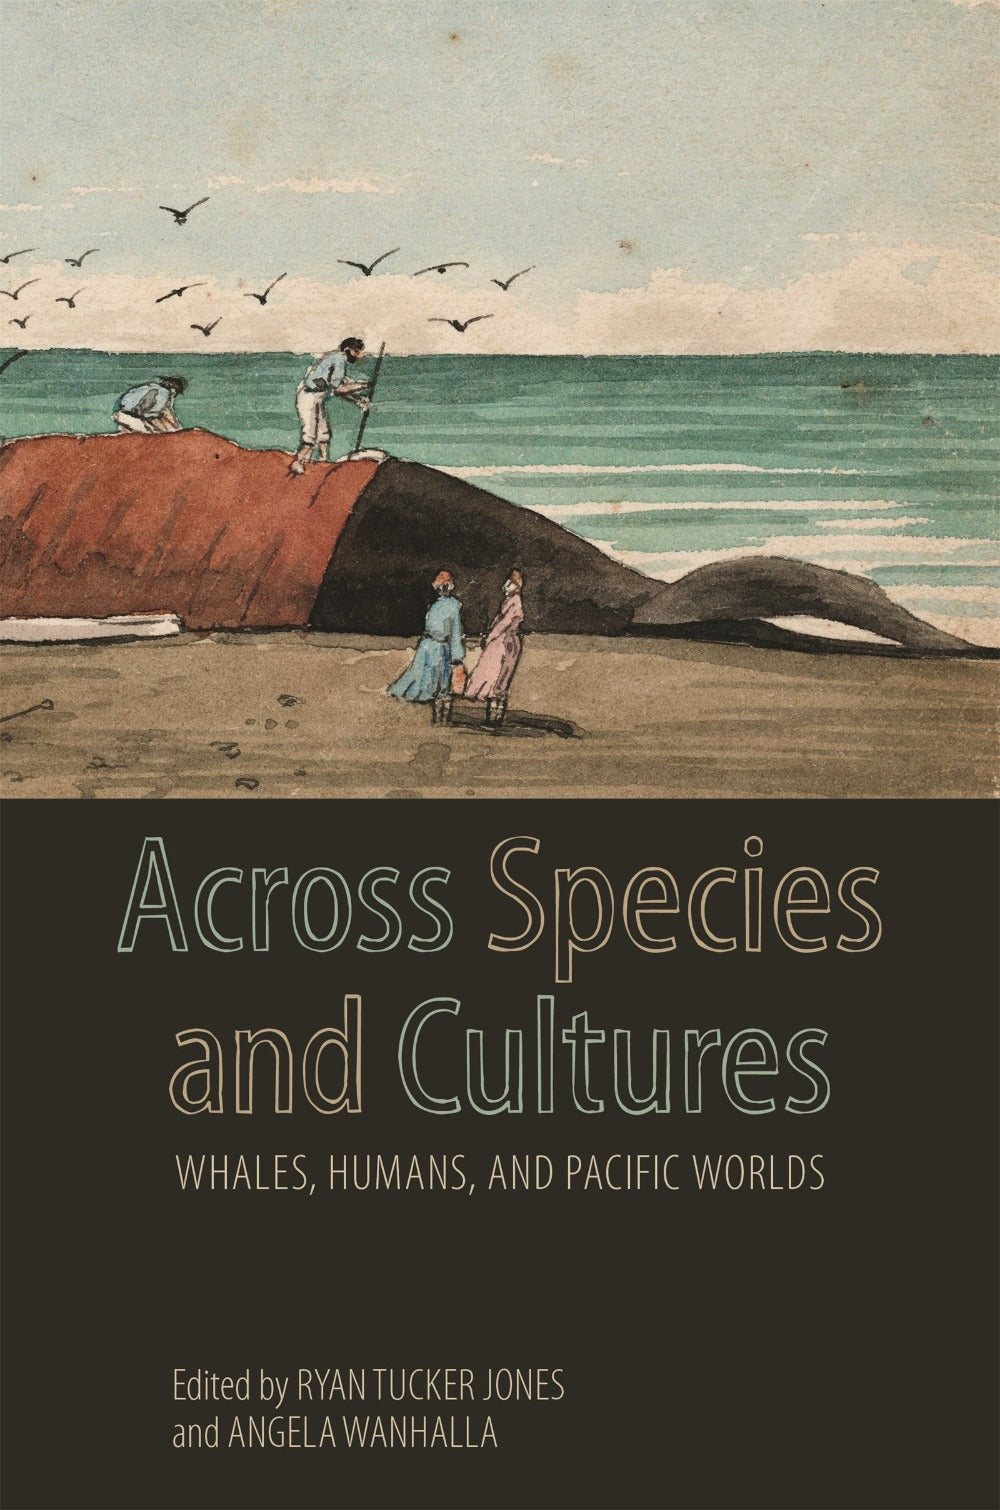 Across Species and Cultures: Whales, Humans and Pacific Worlds Edited by Ryan Tucker Jones and Angela Wanhalla